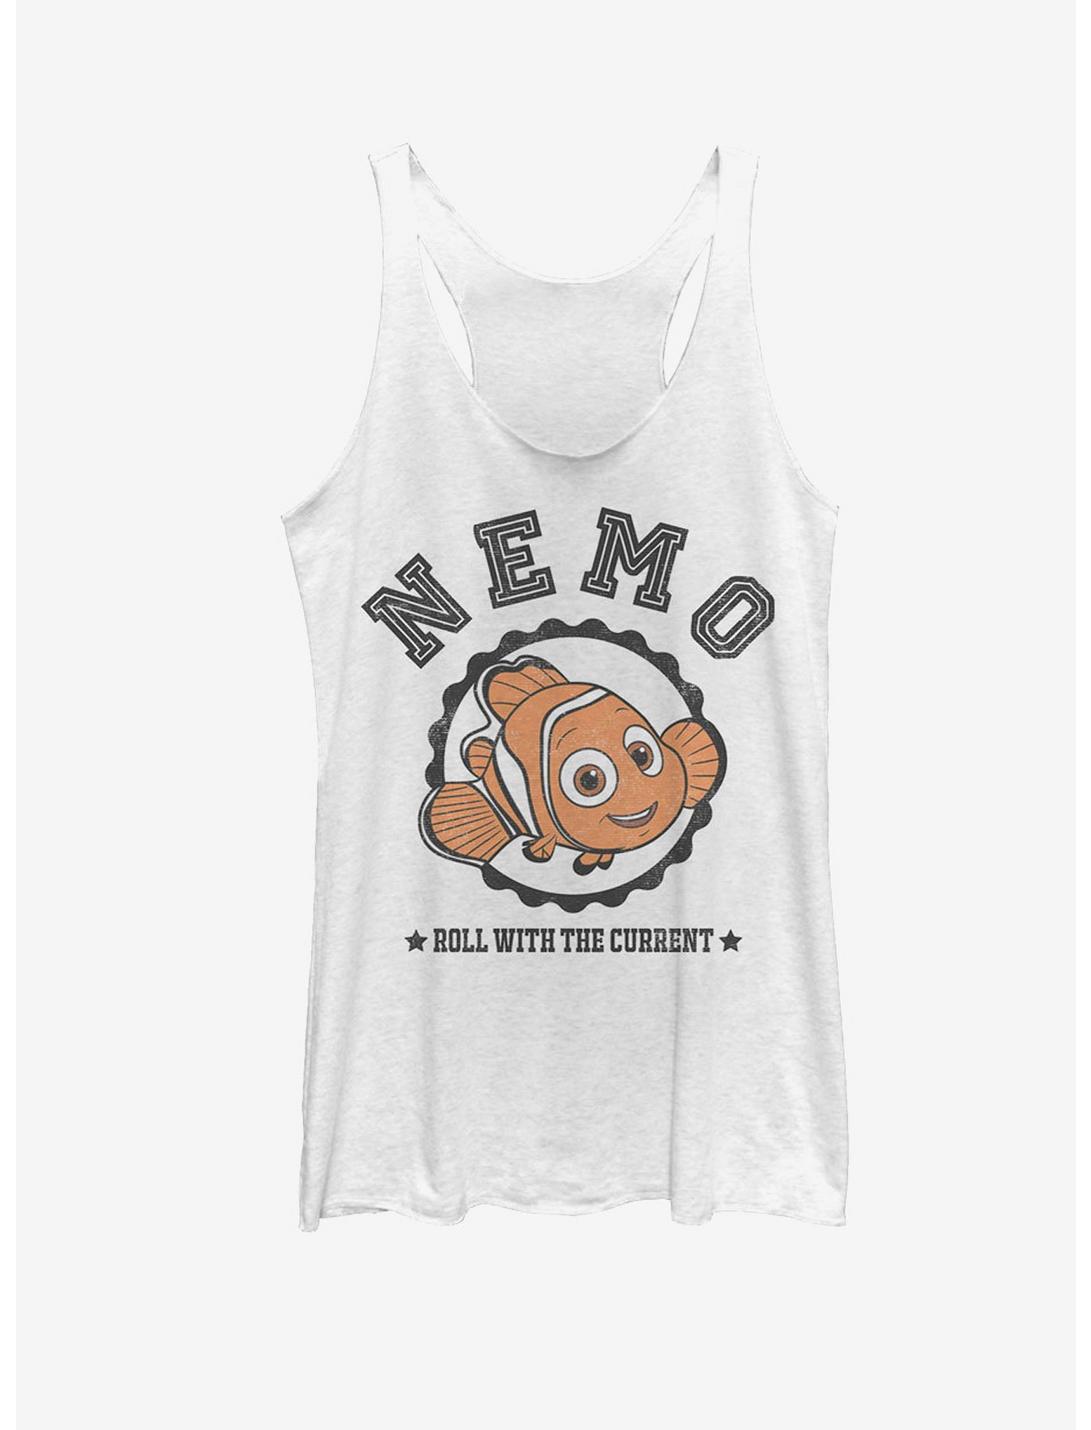 Disney Pixar Finding Nemo Roll With Current Womens Tank, WHITE HTR, hi-res